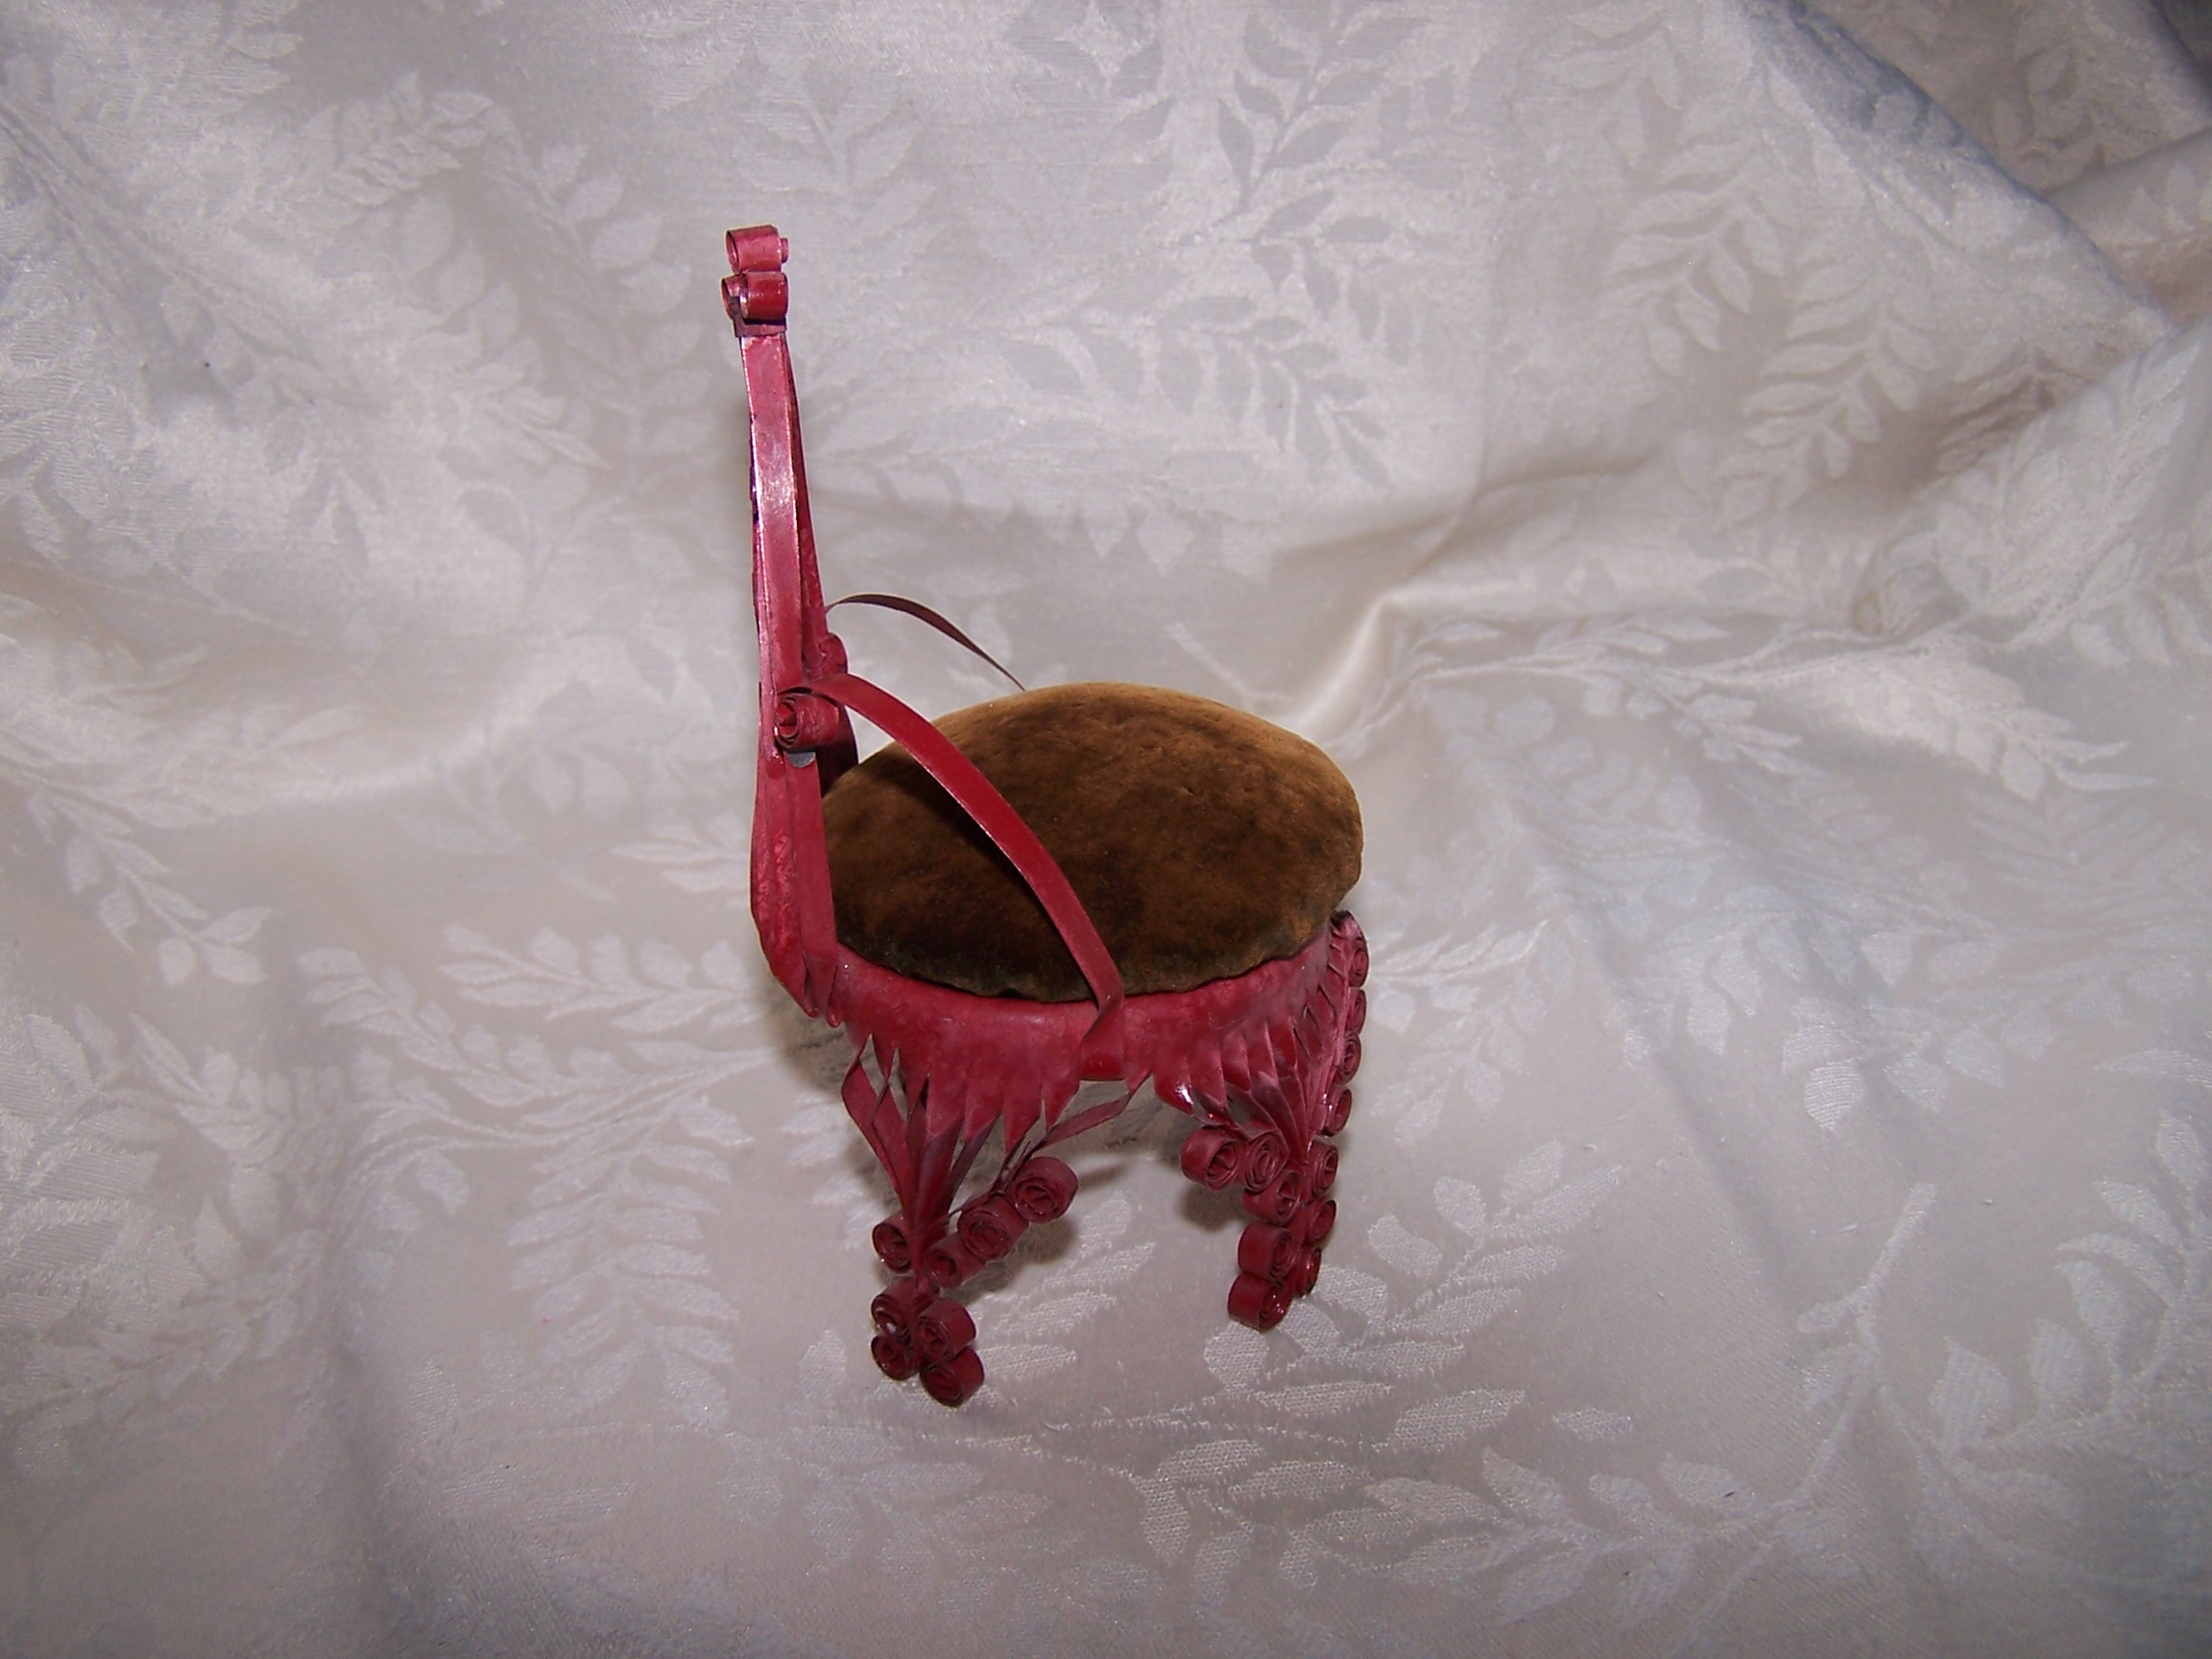 Image 3 of Quilled Pin Cushion Chair, Red, Folk Art, Vintage